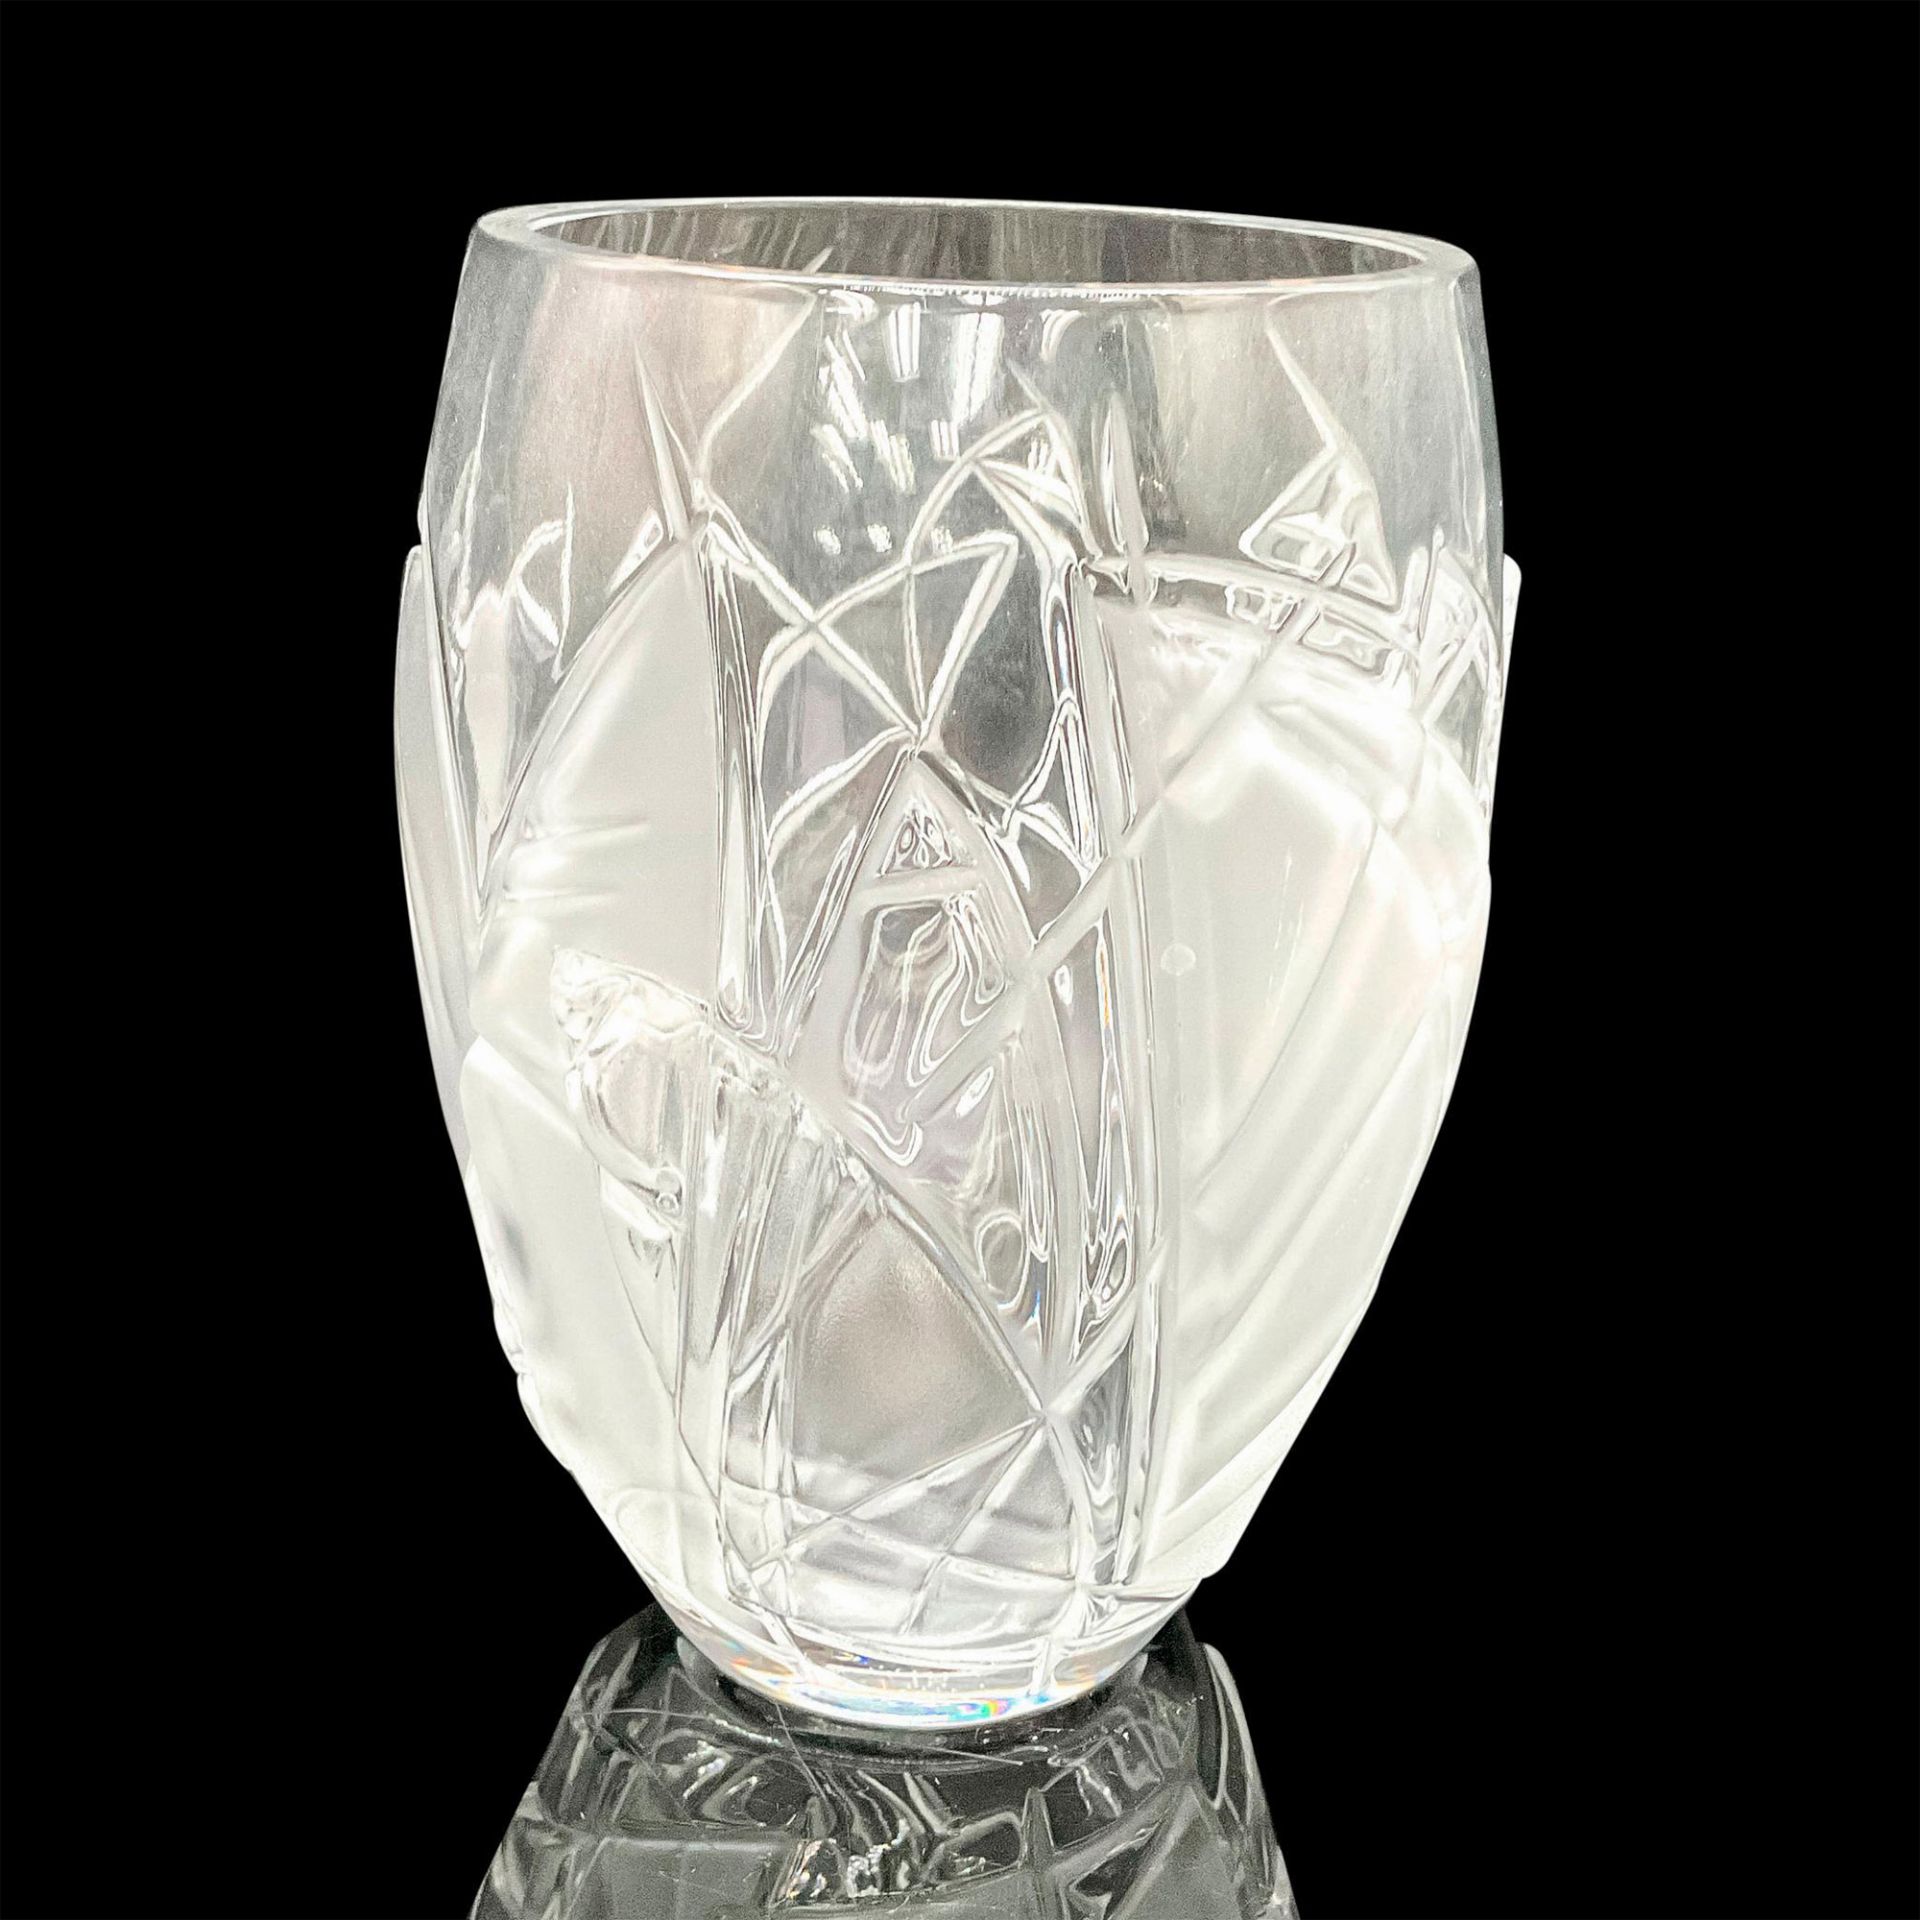 Lalique Crystal by Mariscal Vase, Valencia 32nd America's Cup - Image 2 of 3